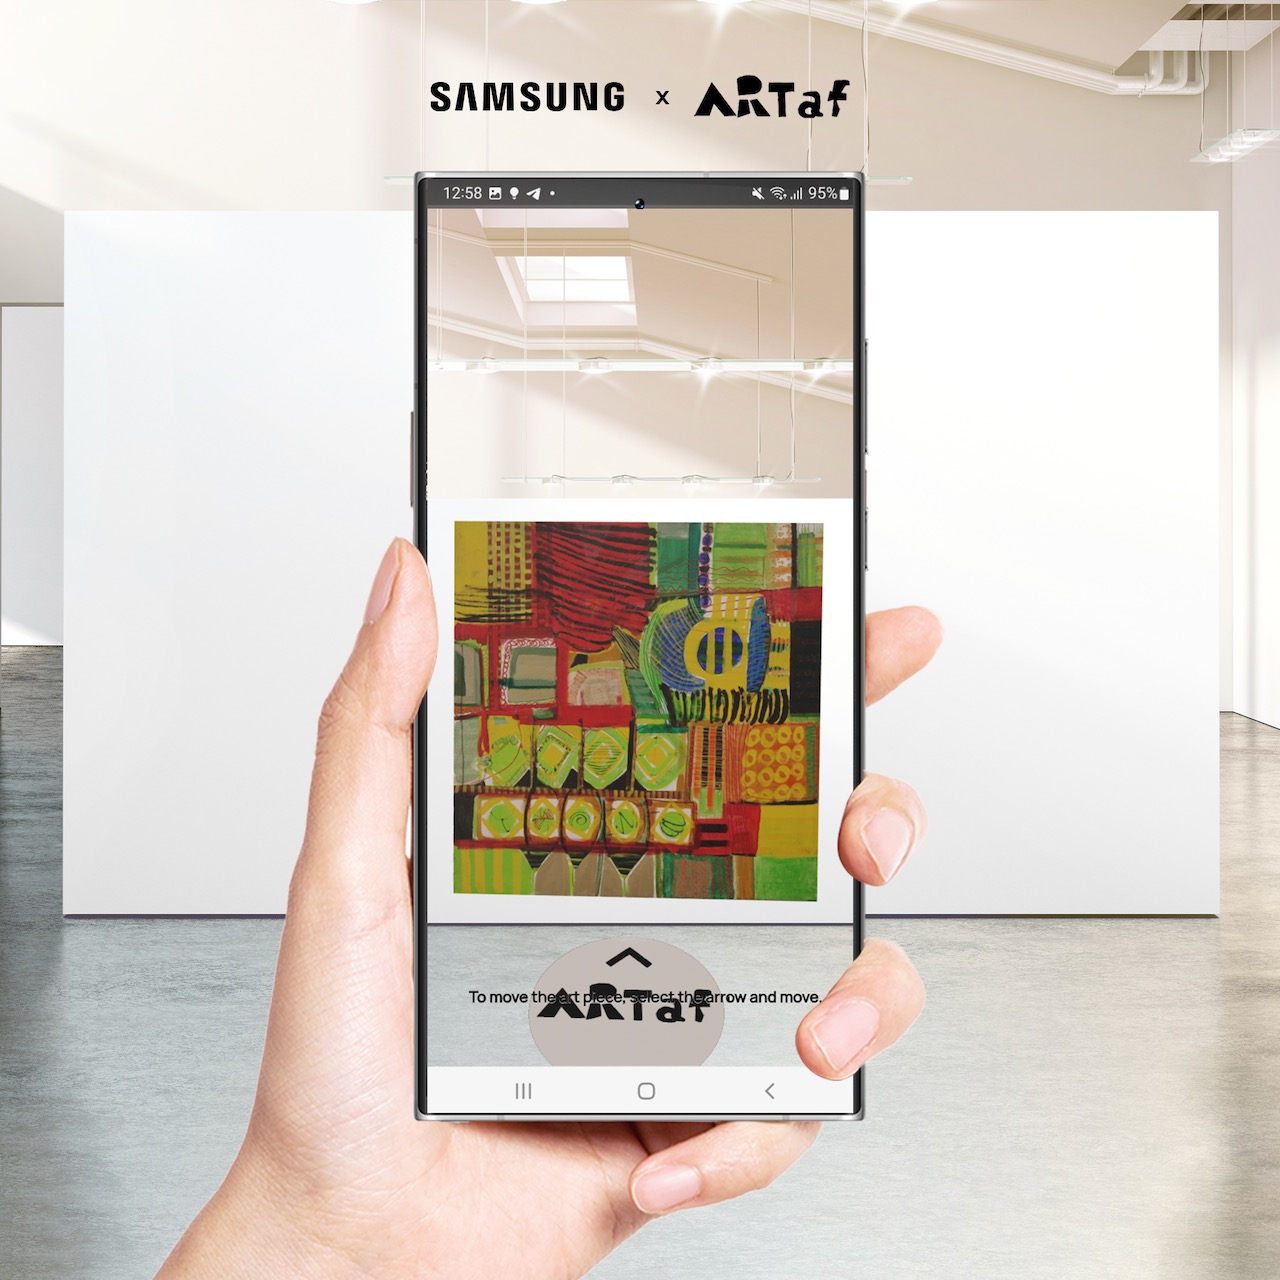 Samsung partners ArtAF to bring Goh Beng Kwan’s art works to life with Samsung Galaxy S22 5G series